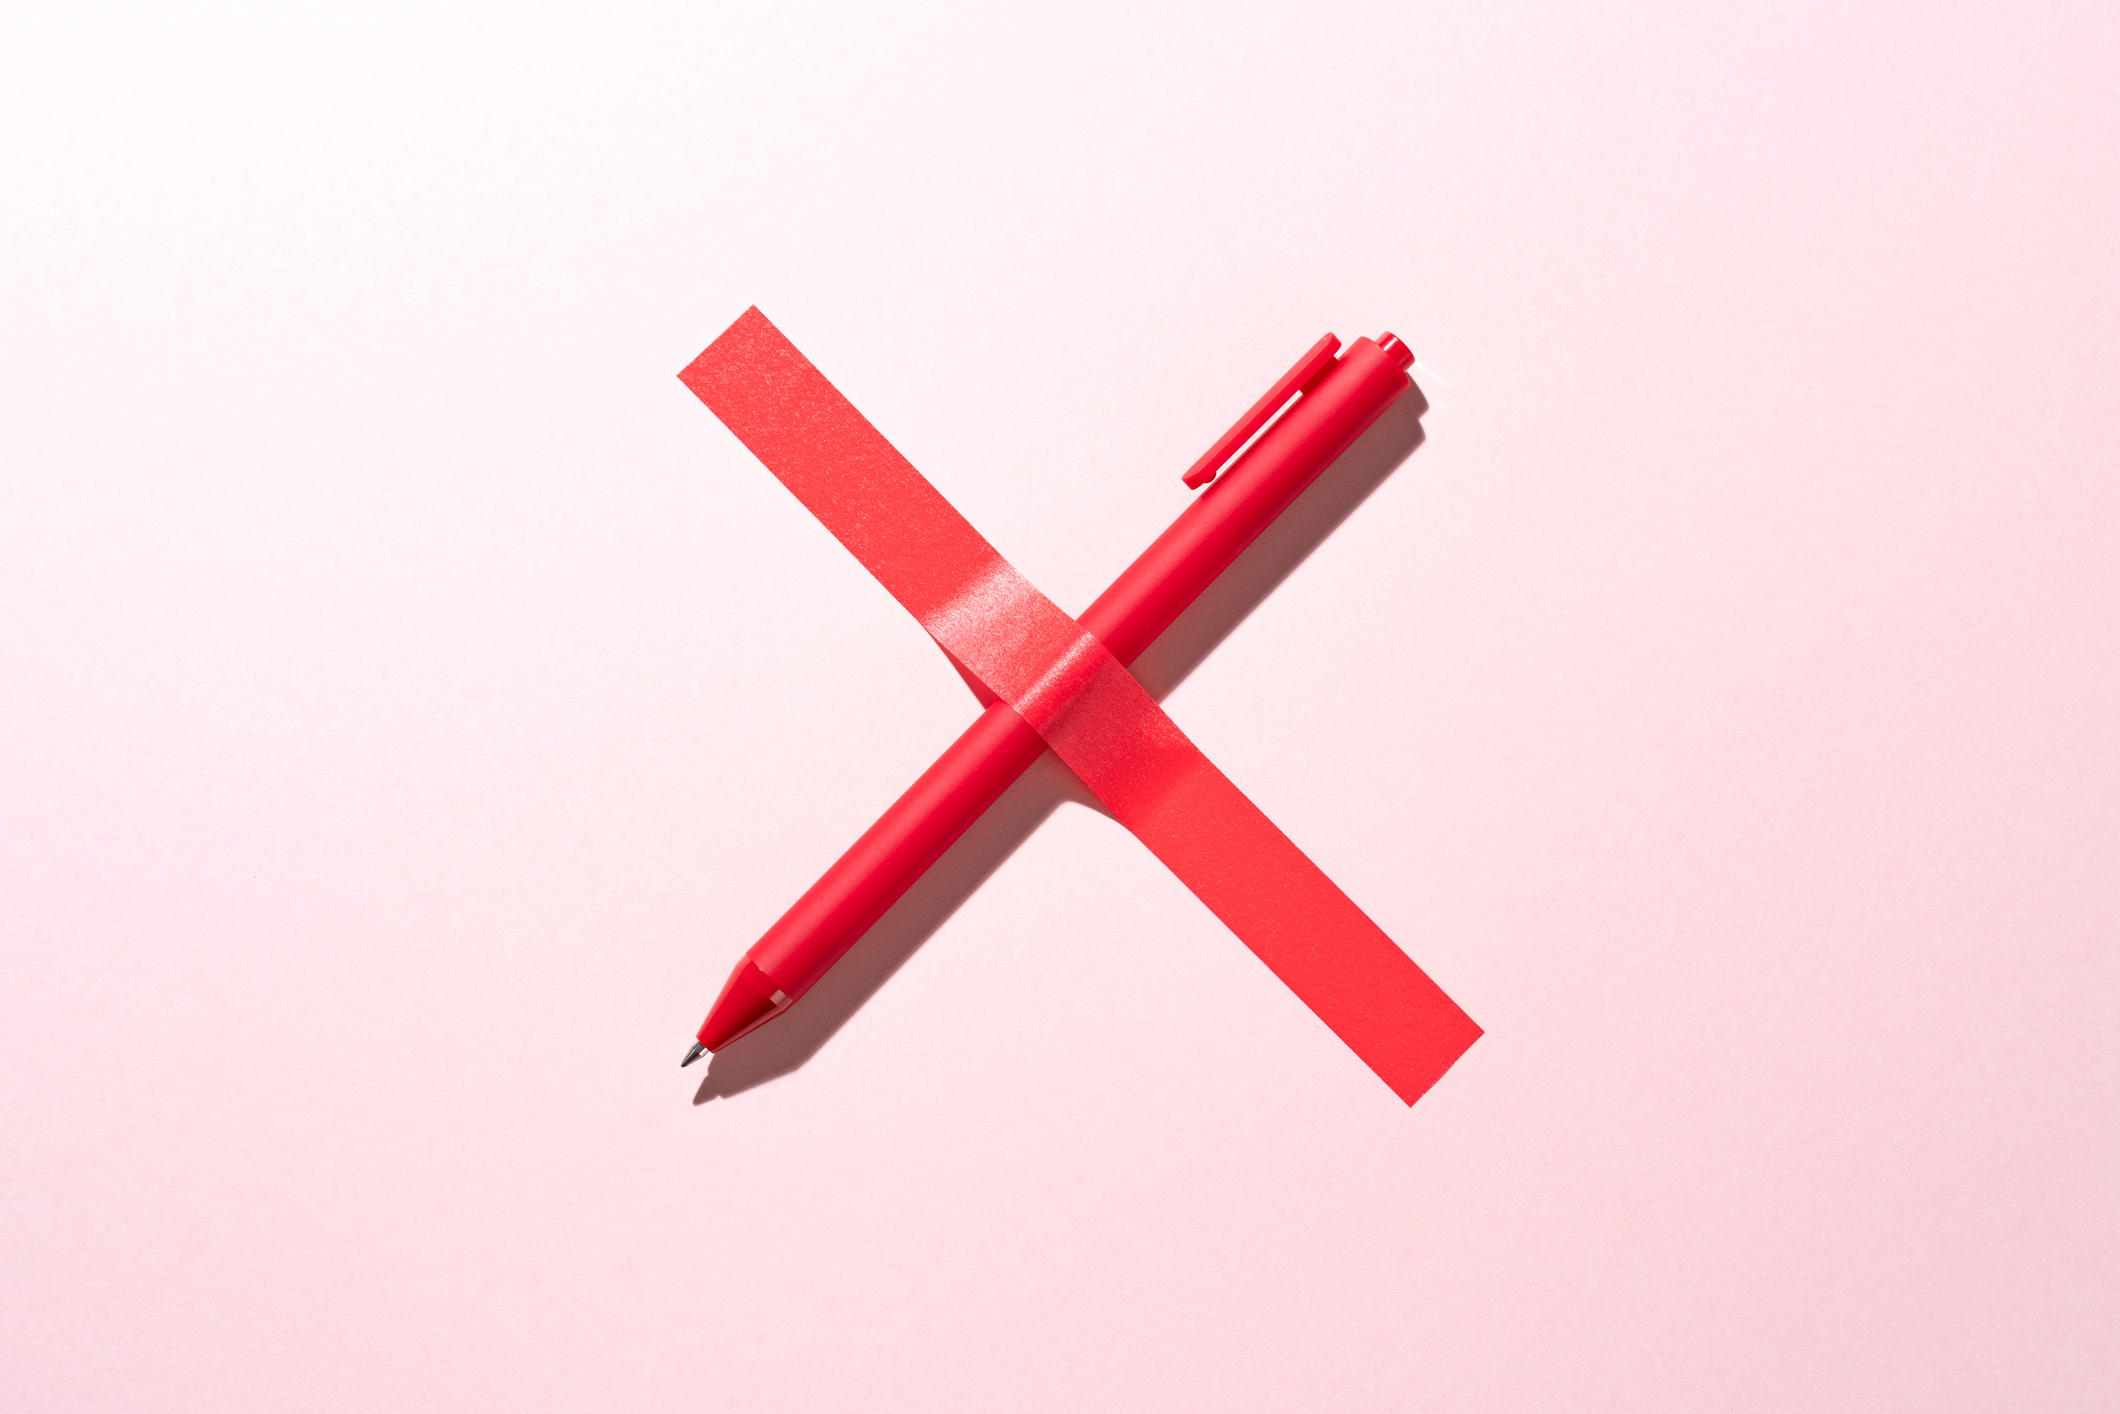 Red Cross Sign Consists of a Pen Covered with Tape, Censorship